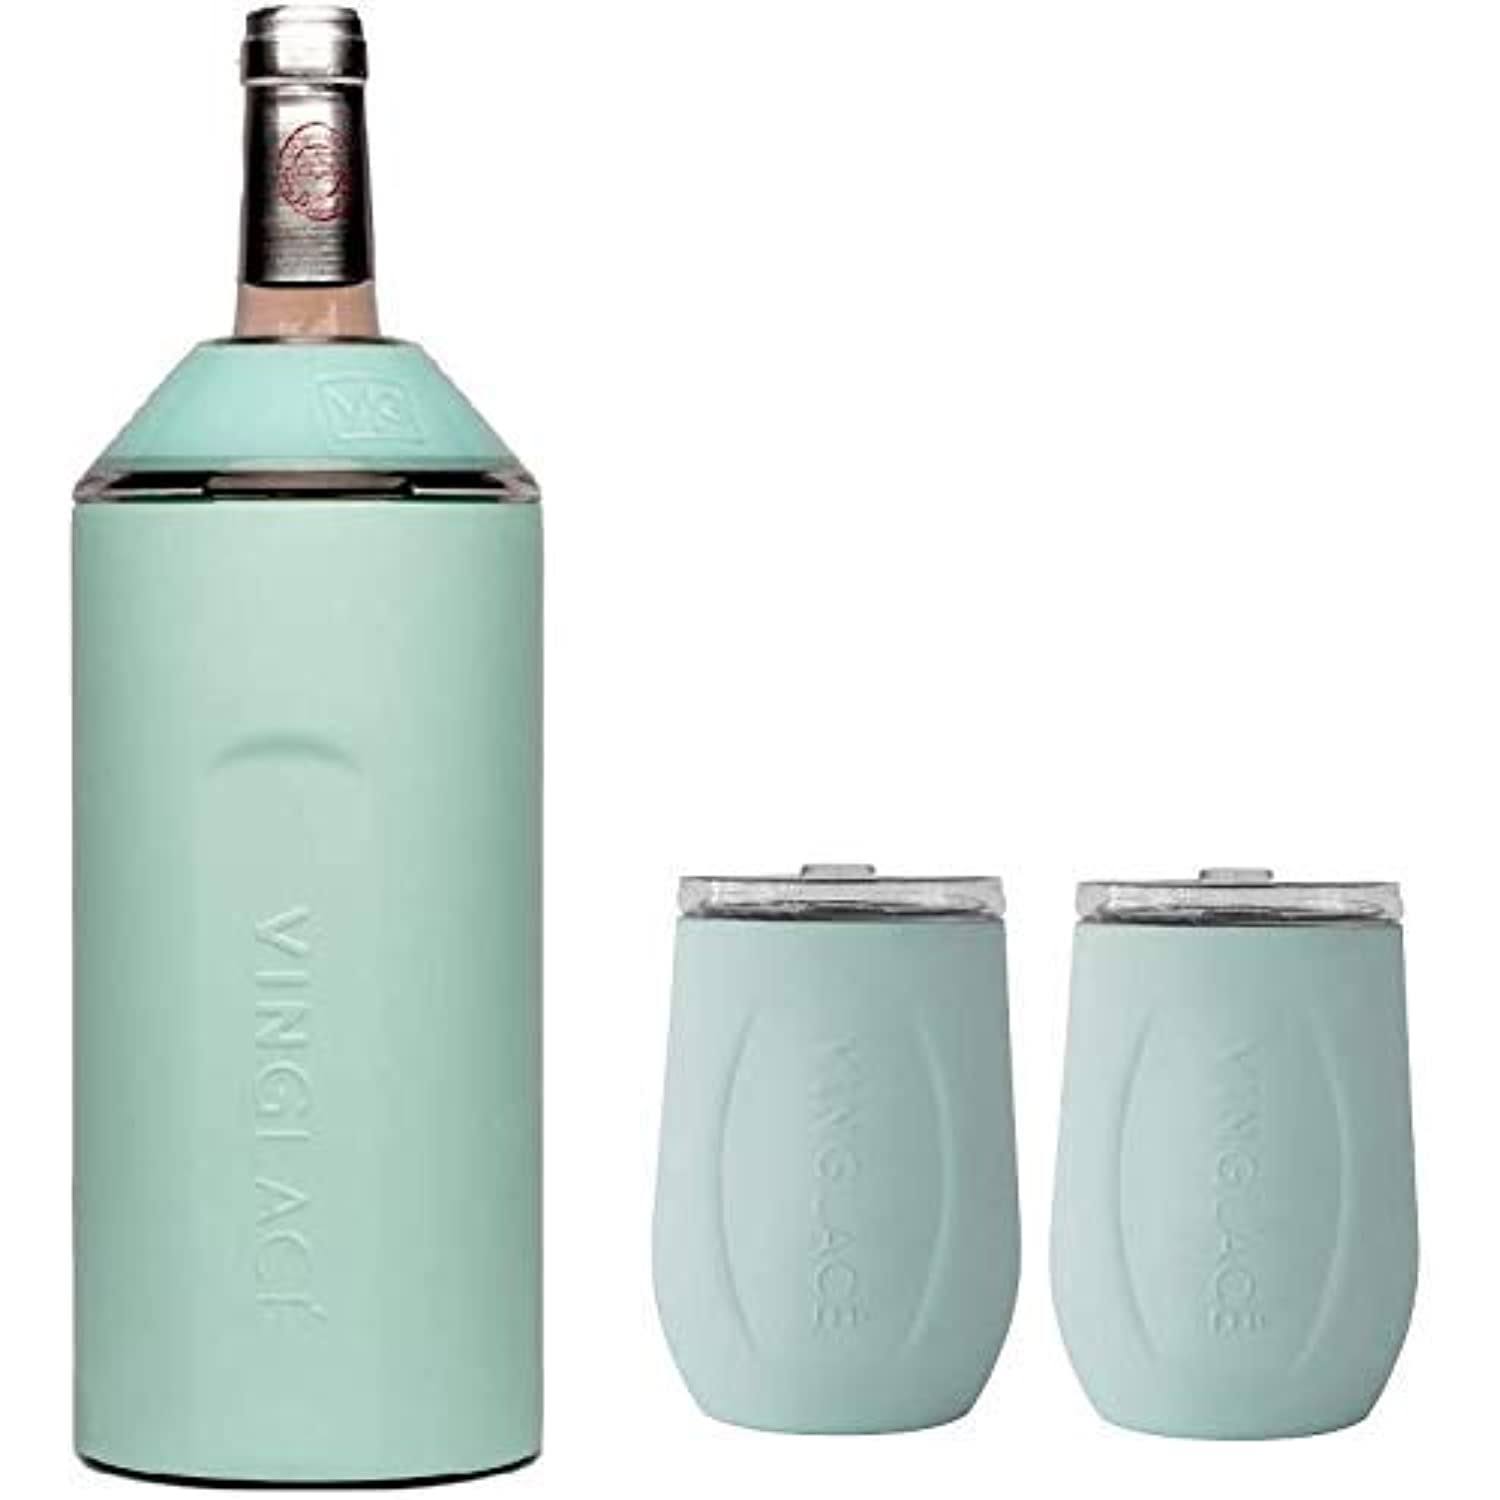 Vinglacu00e9 Gift Set - Bottle Insulator Chiller with 2 Stemless Wine Glasses - Great Gift Ideas For Wine and Champagne Lovers (Sea Glass)